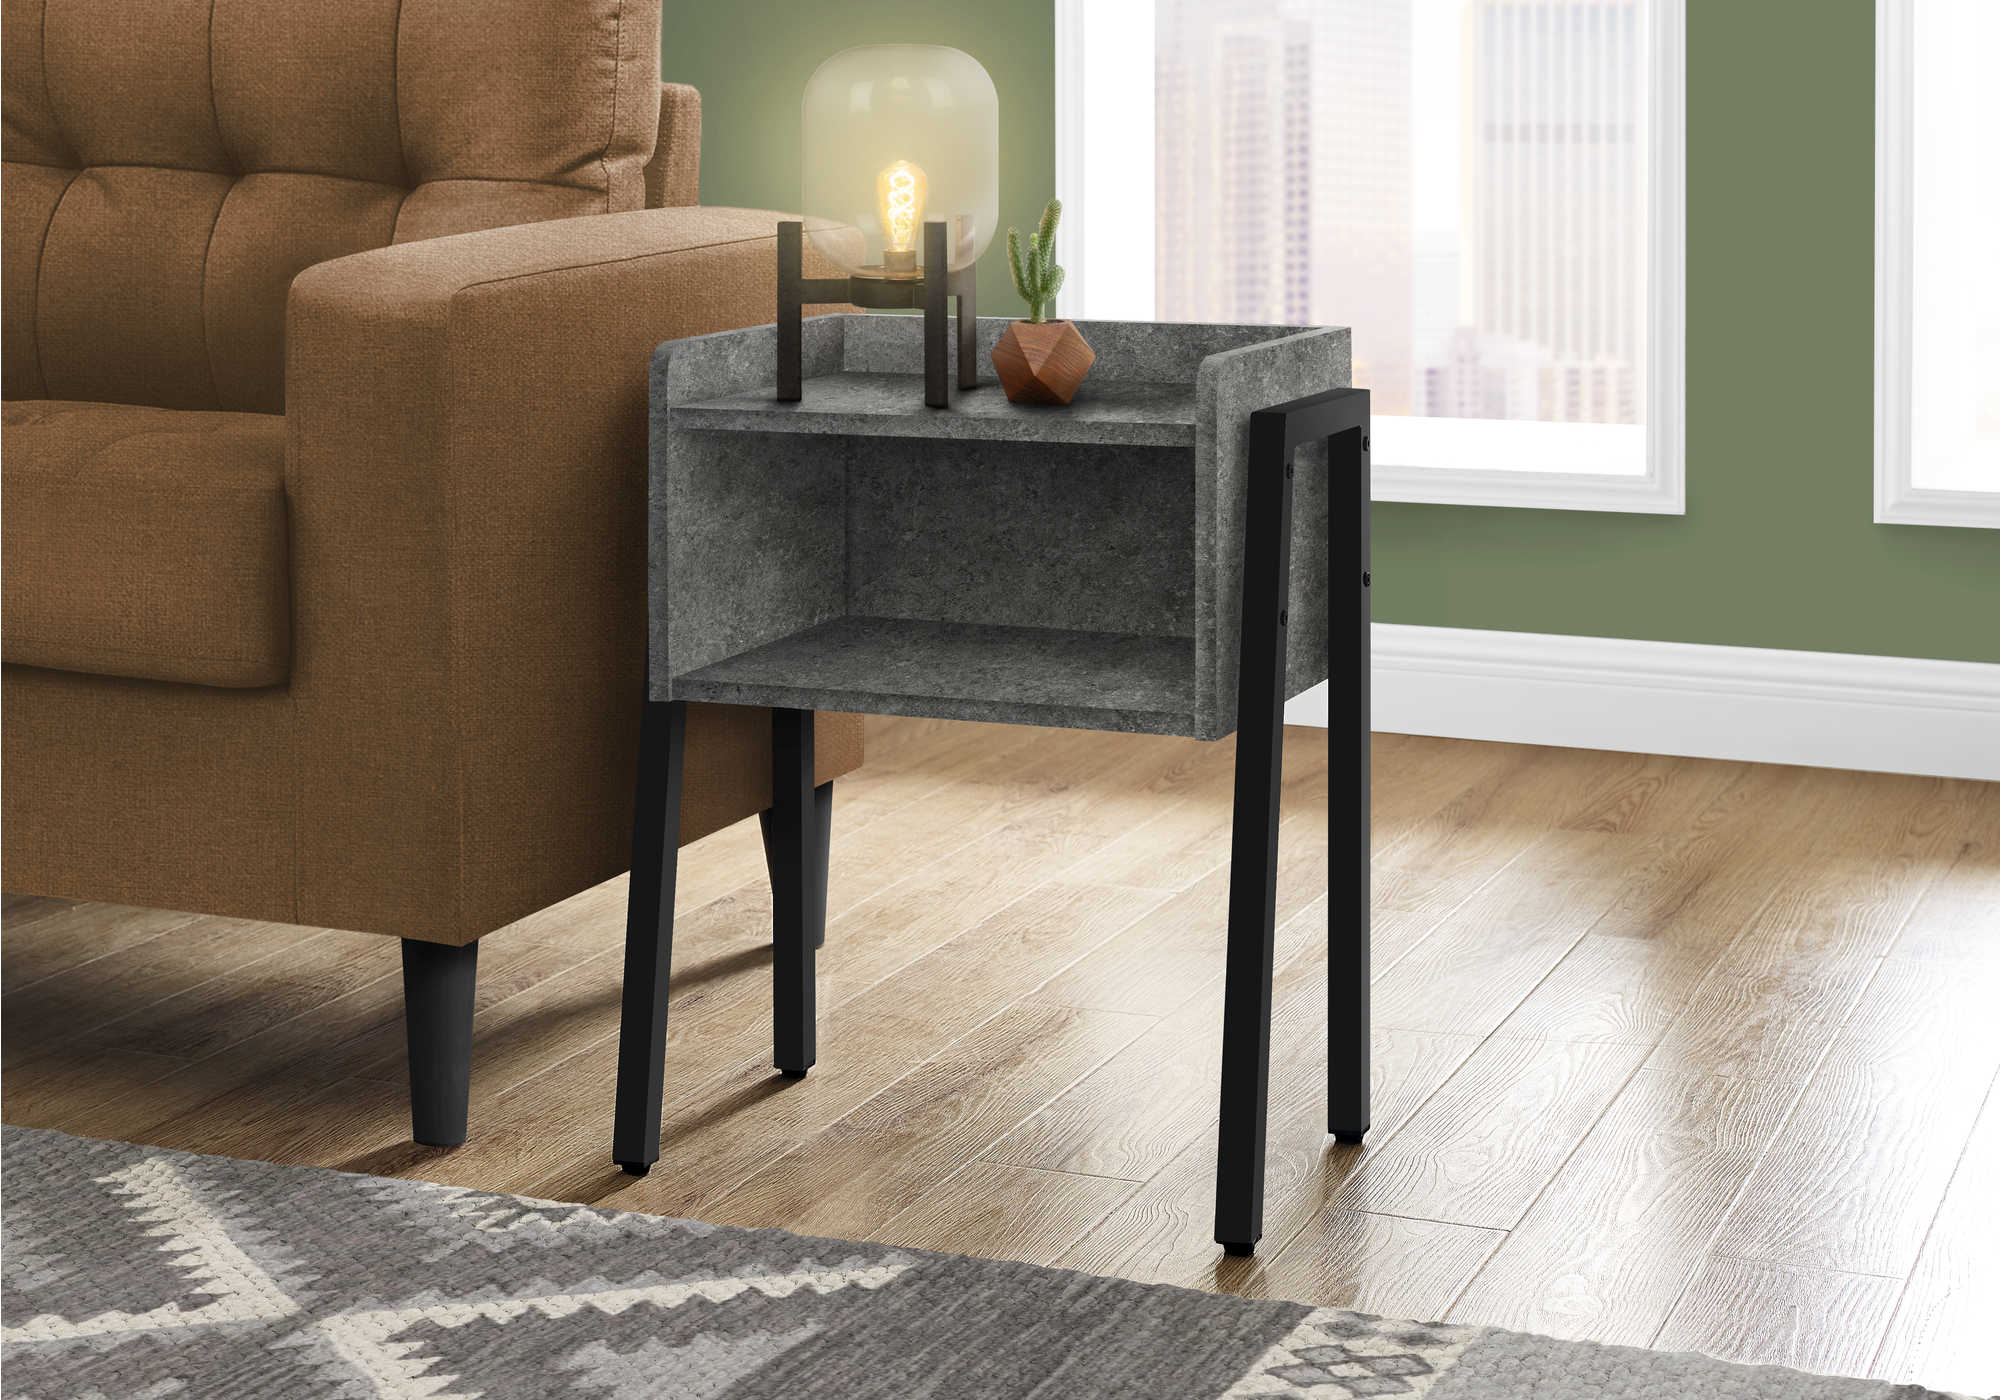 accent table - 23"h / grey stone-look / black metal i3584